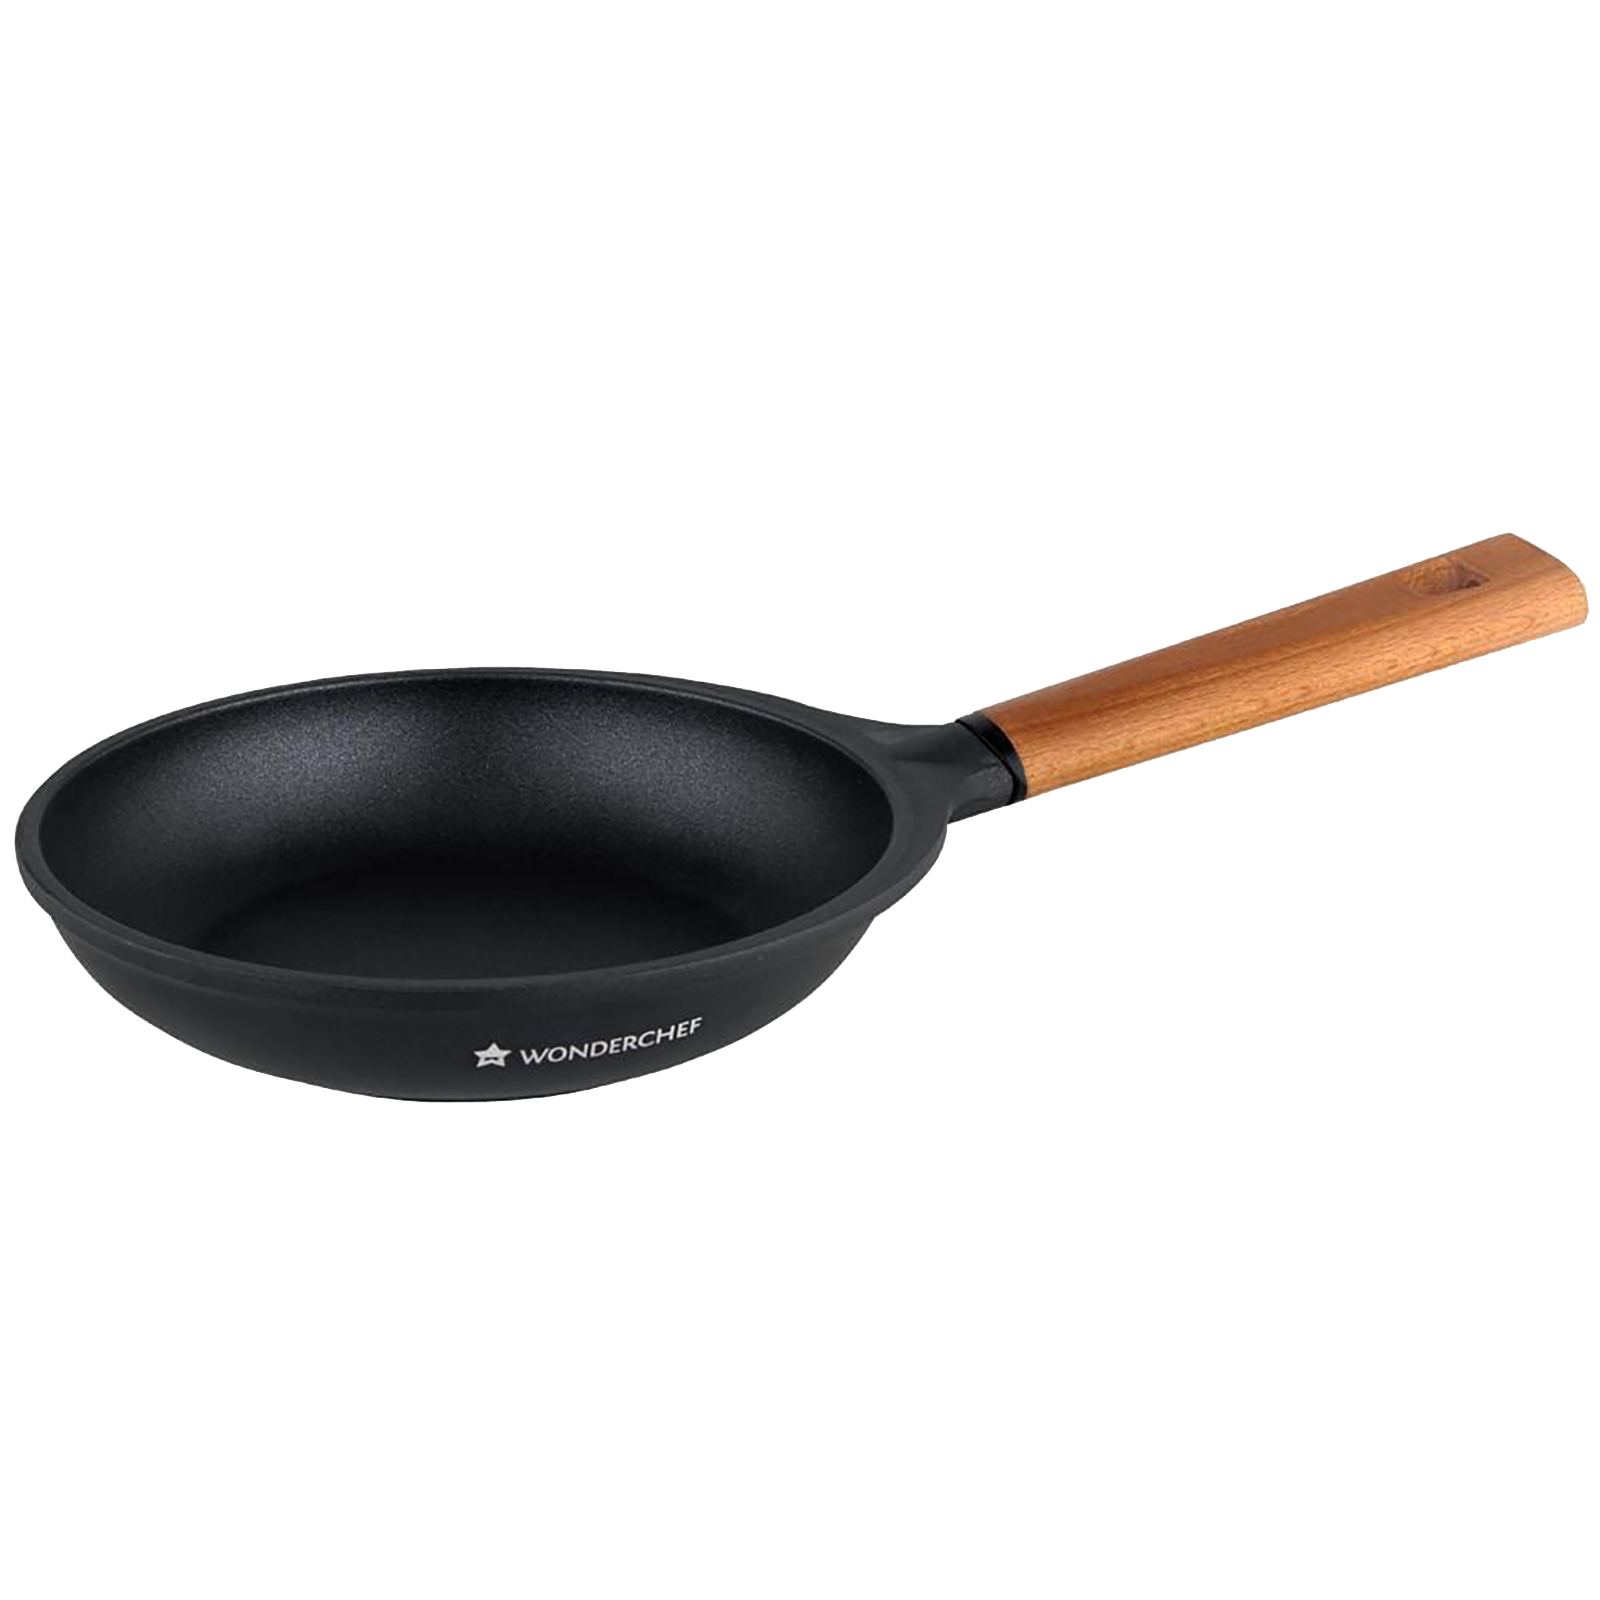 Wonderchef Caesar Frying Pan For Induction, Stoves & Cooktops (Non-Stick Coating, 63152124, Black)_1